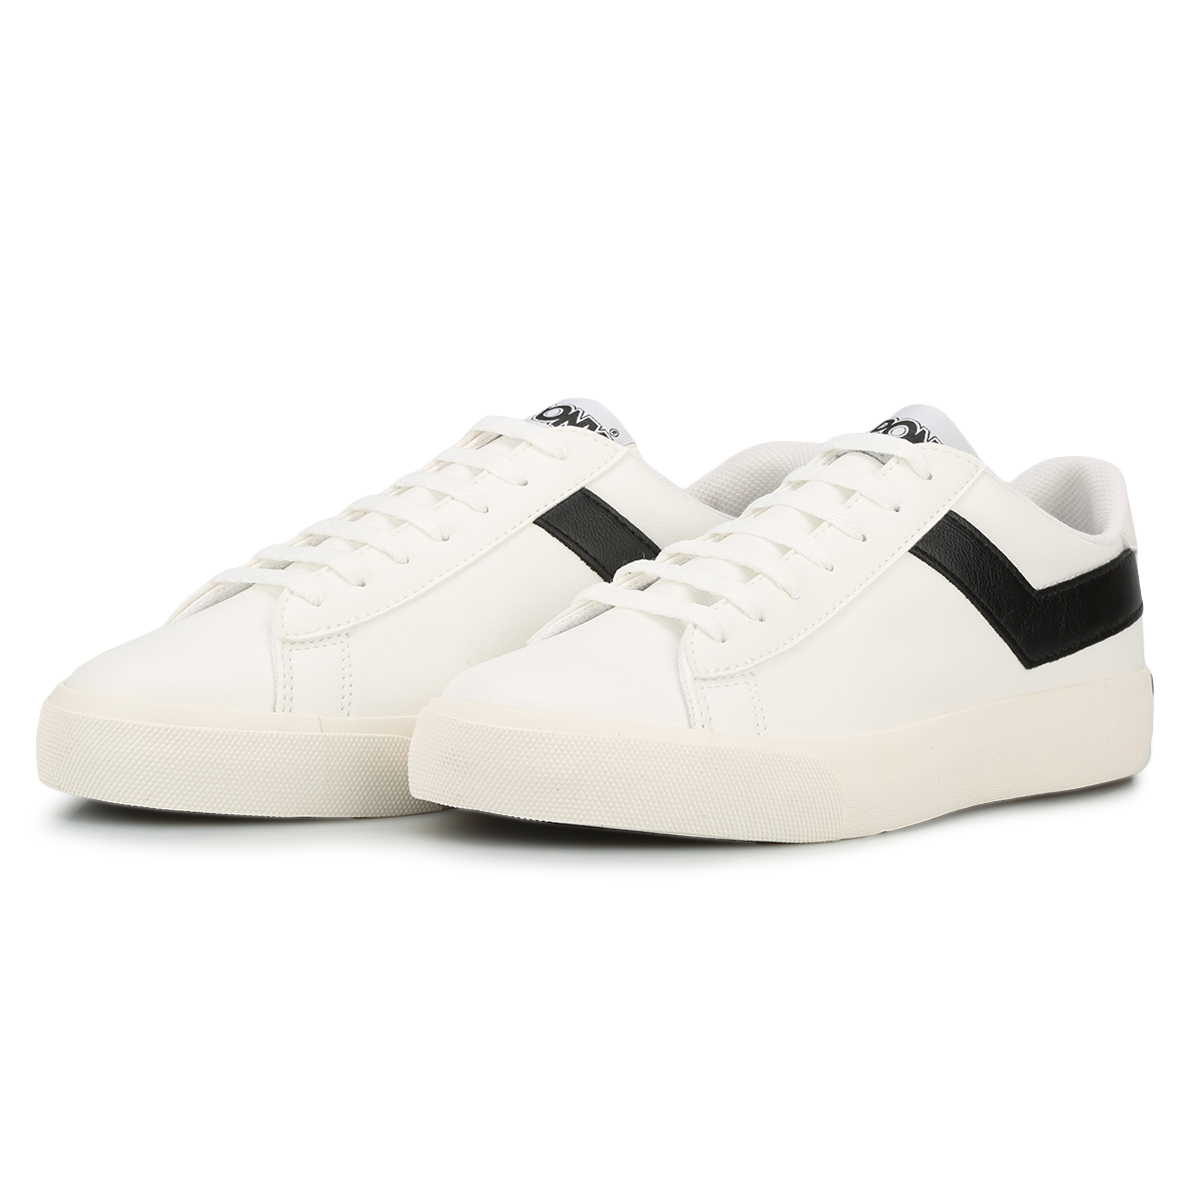 Zapatillas Pony Topstar Ox New Pele,  image number null